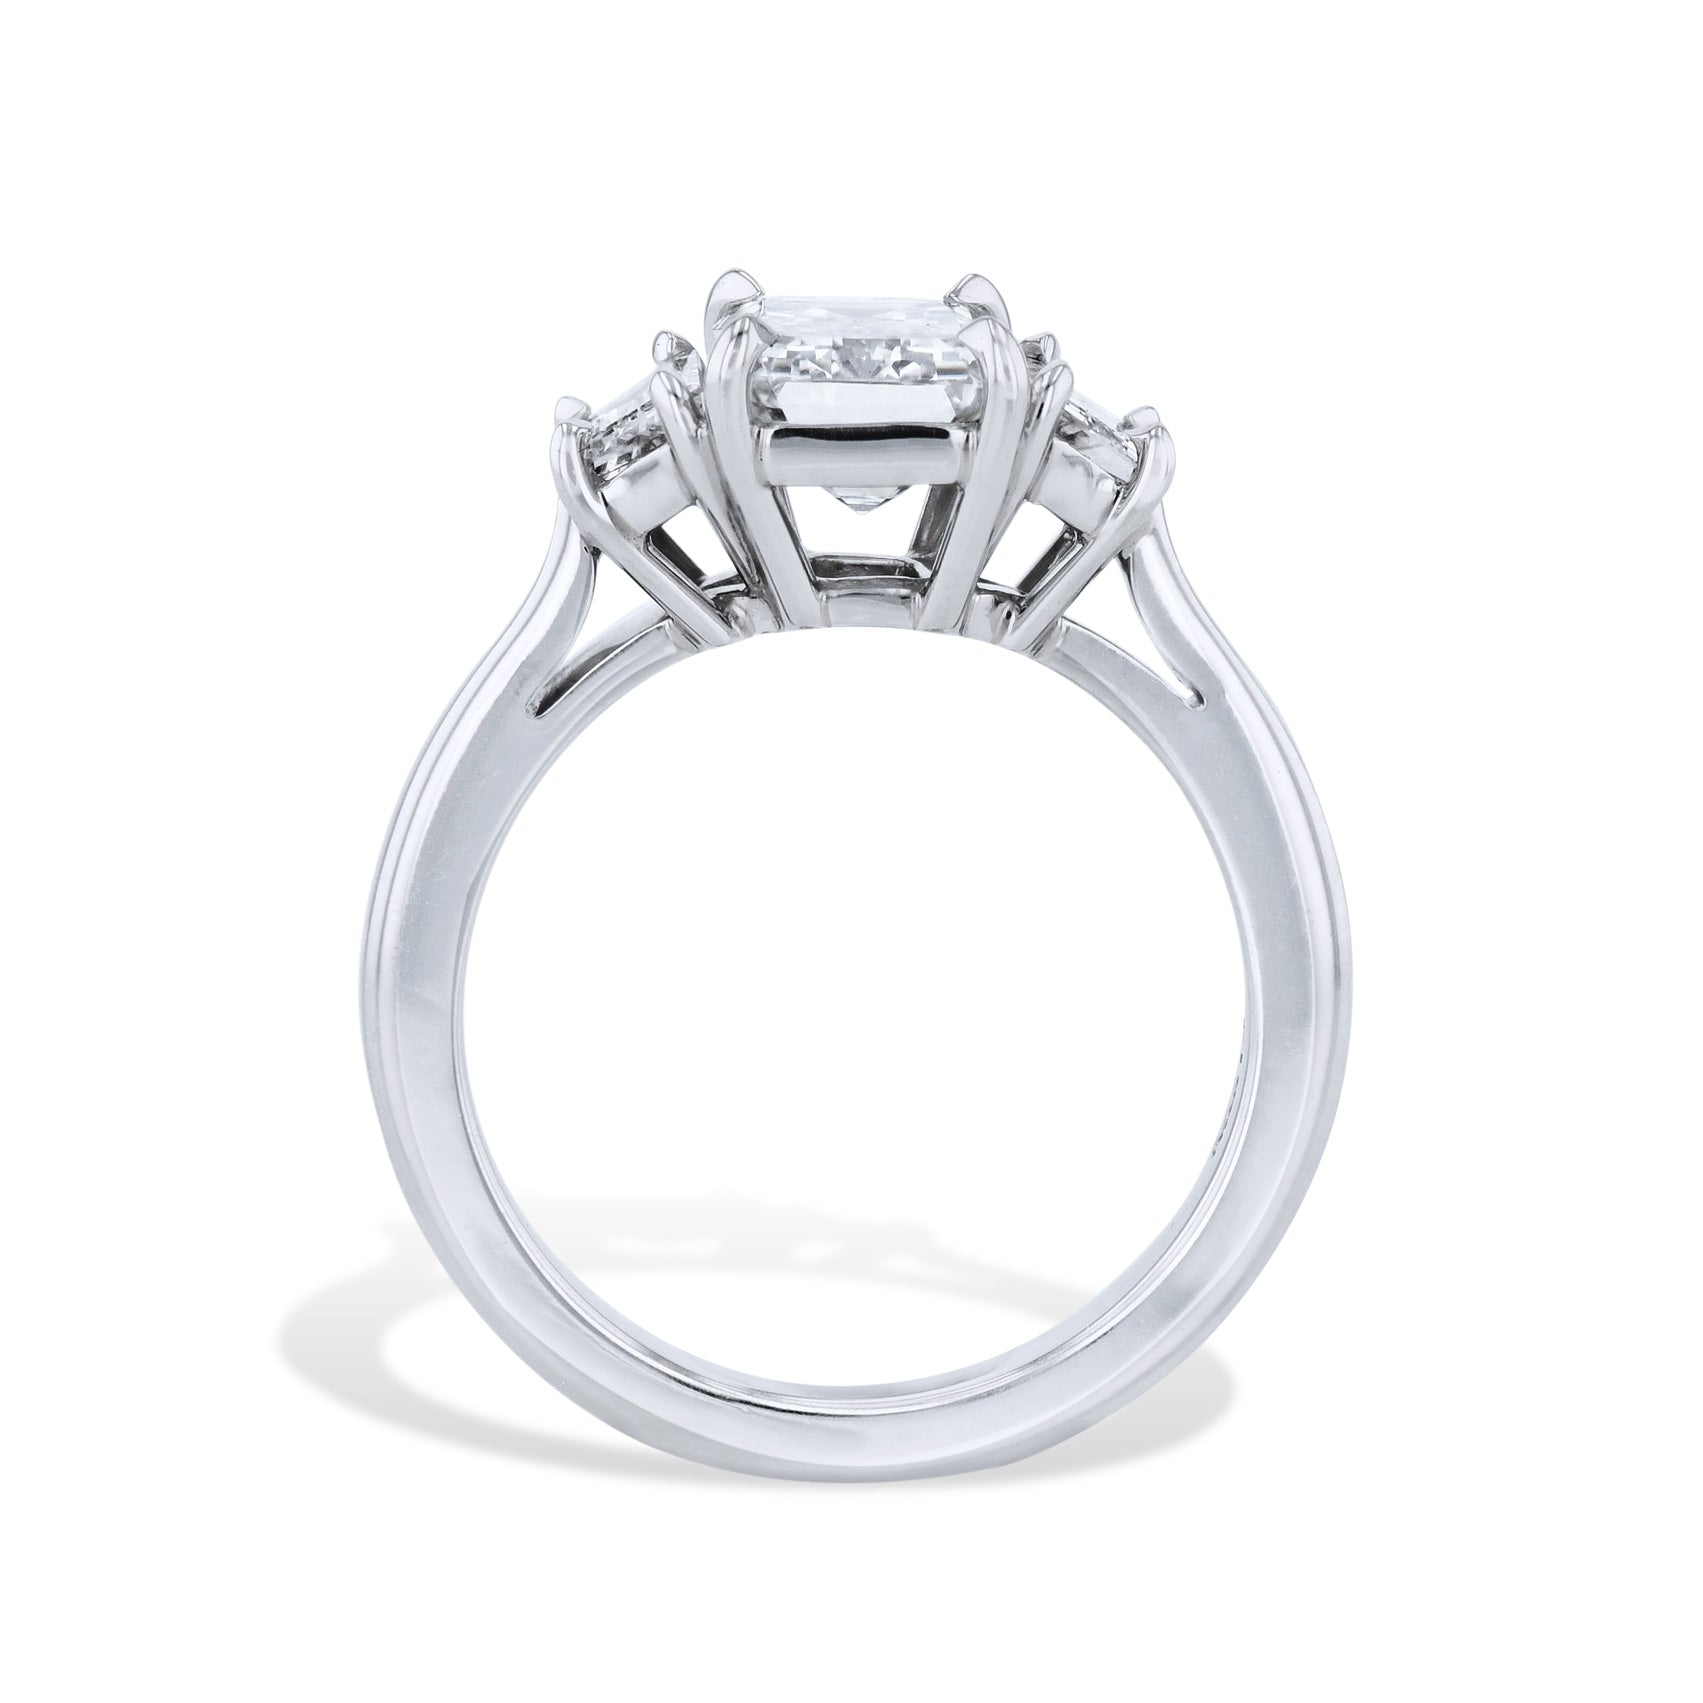 Platinum Emerald Cut Diamond with Trapazoids Side Stones Engagement Ring Engagement Rings Curated by H